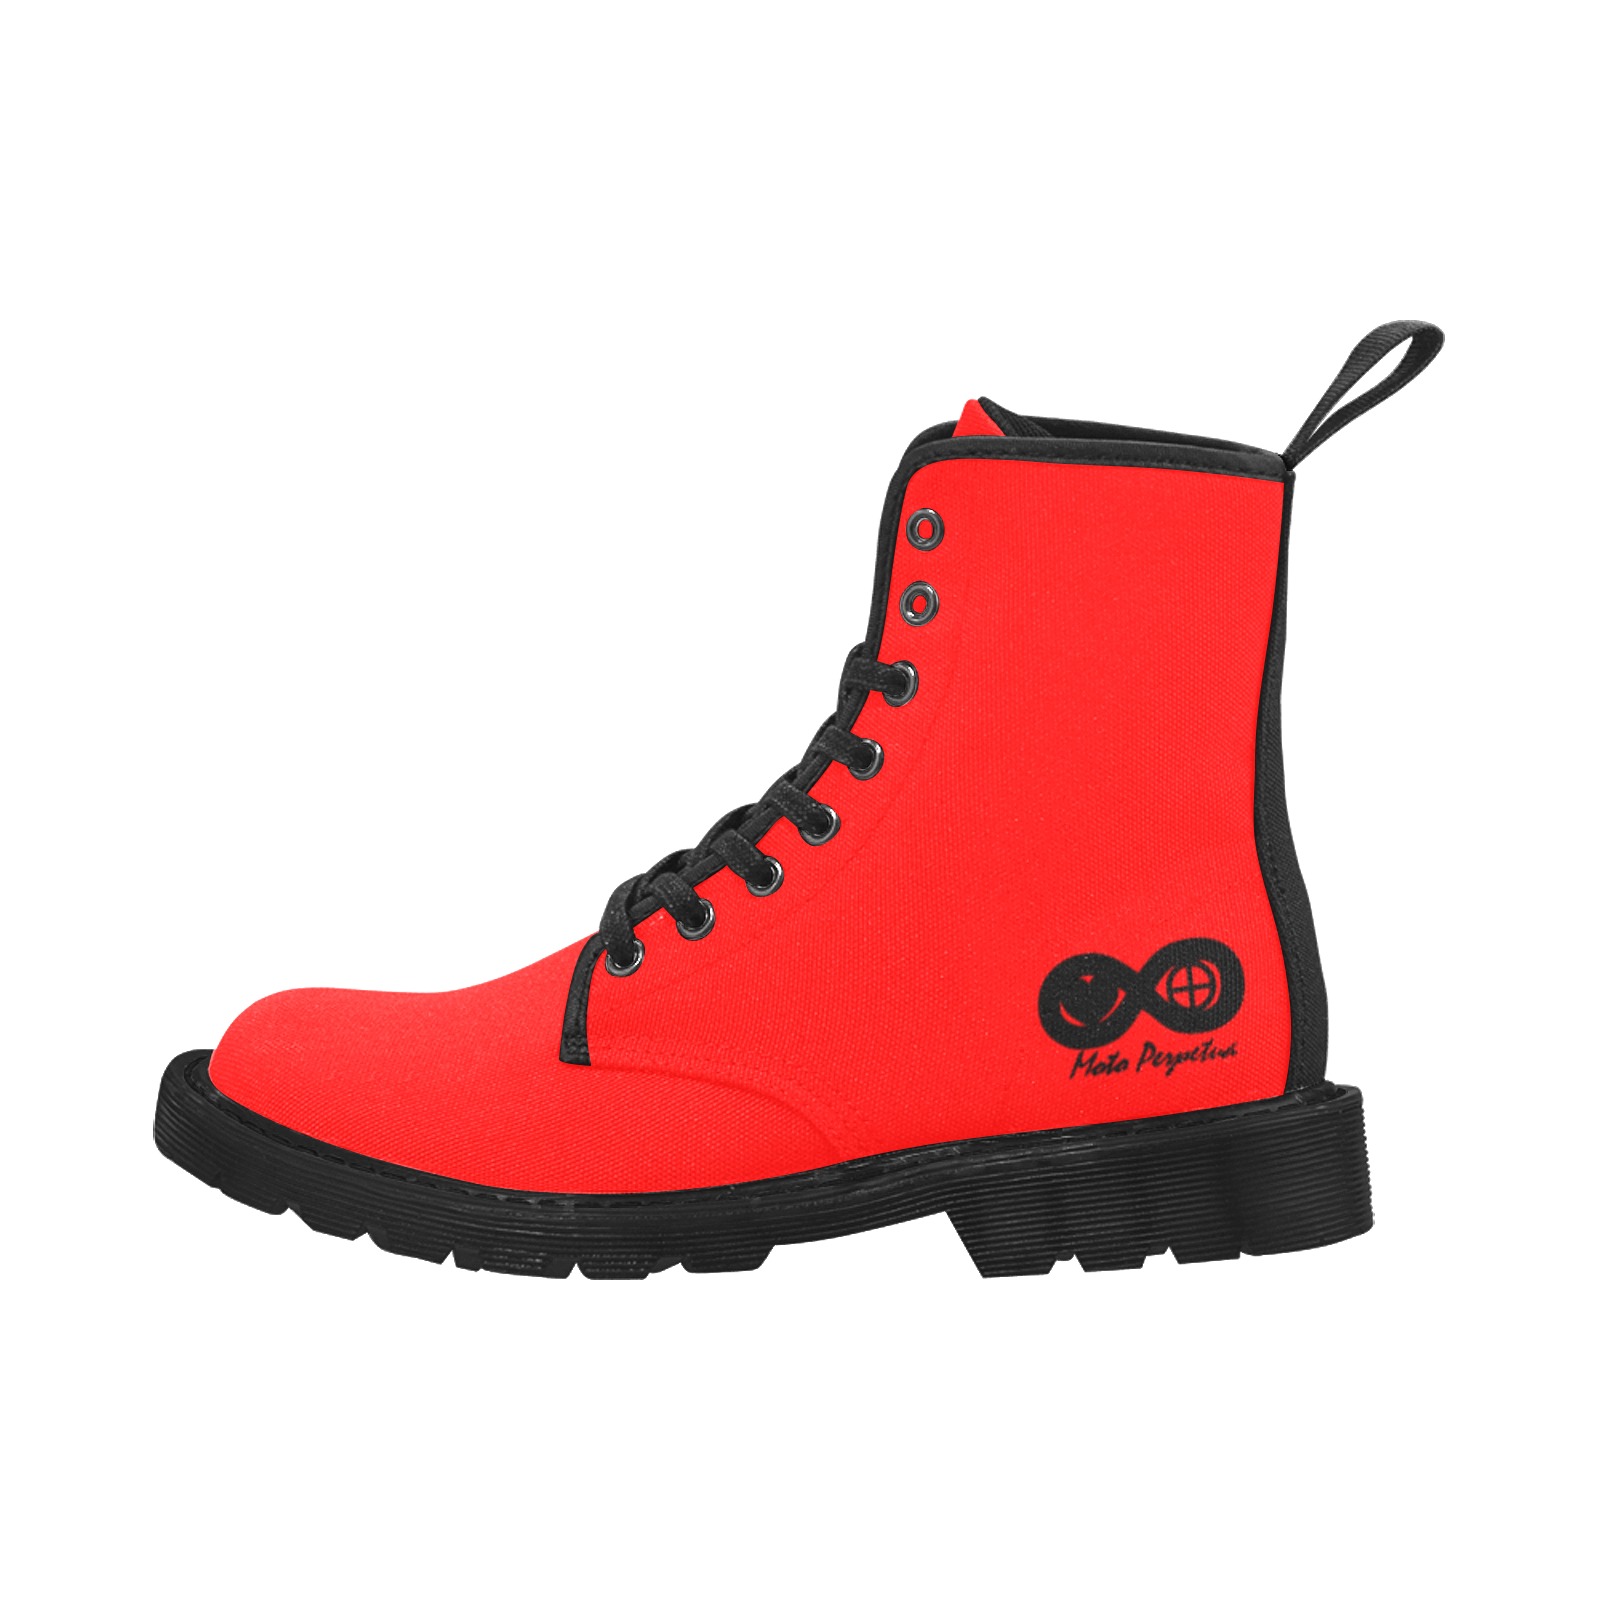 Big Red Boots Free Shipping Good for Cosplay   Moto Perpetua